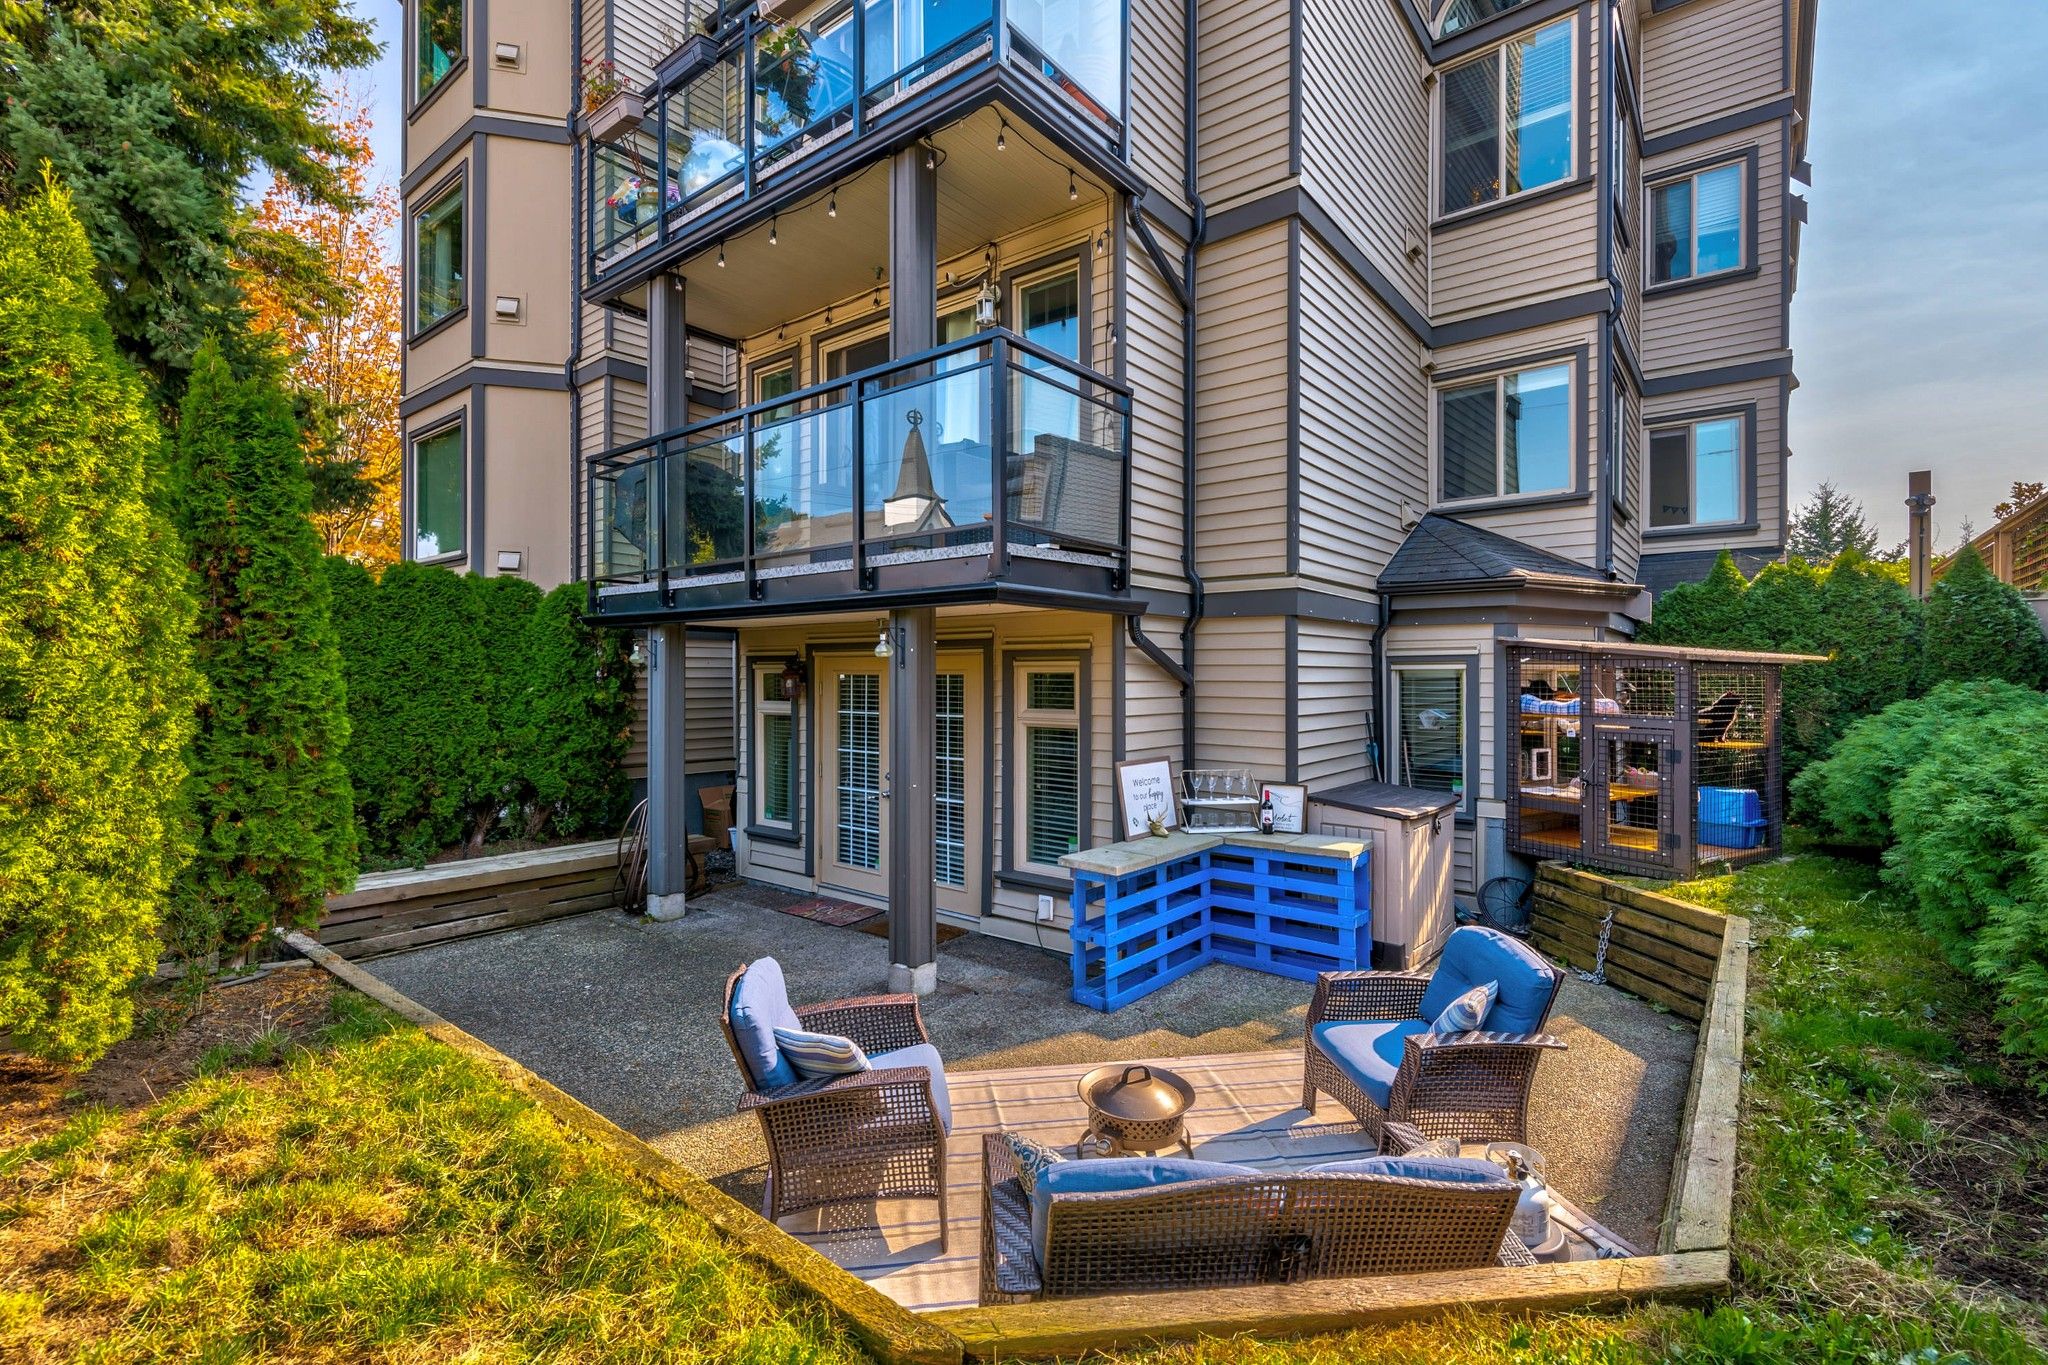 Photo 4: Photos: 103 2709 Victoria Drive in Vancouver: Grandview Woodland Condo for sale (Vancouver East)  : MLS®# R2504262